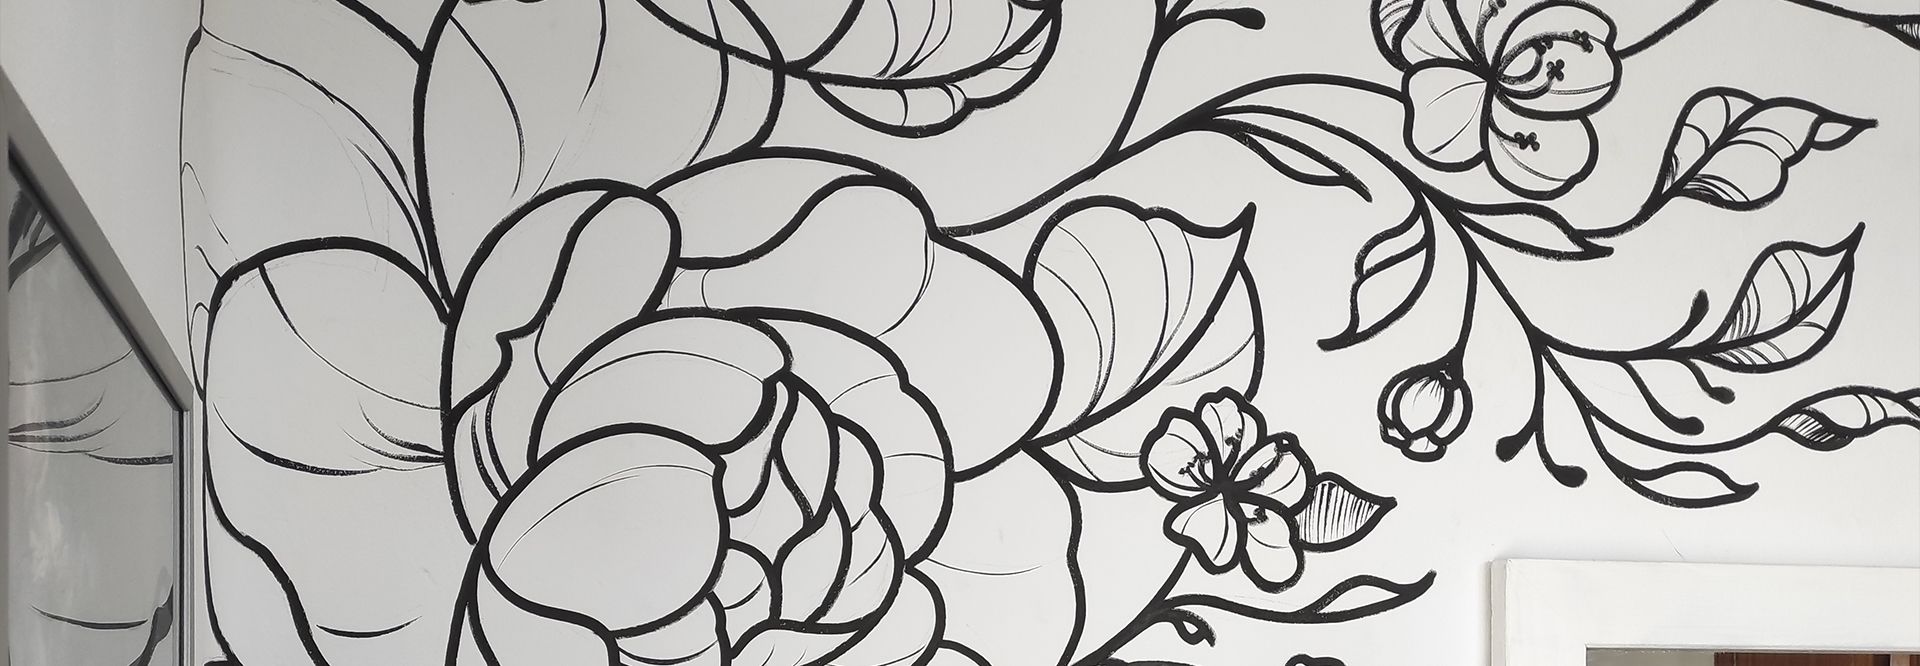 5 Ways to Use Line Drawings as Wall Art